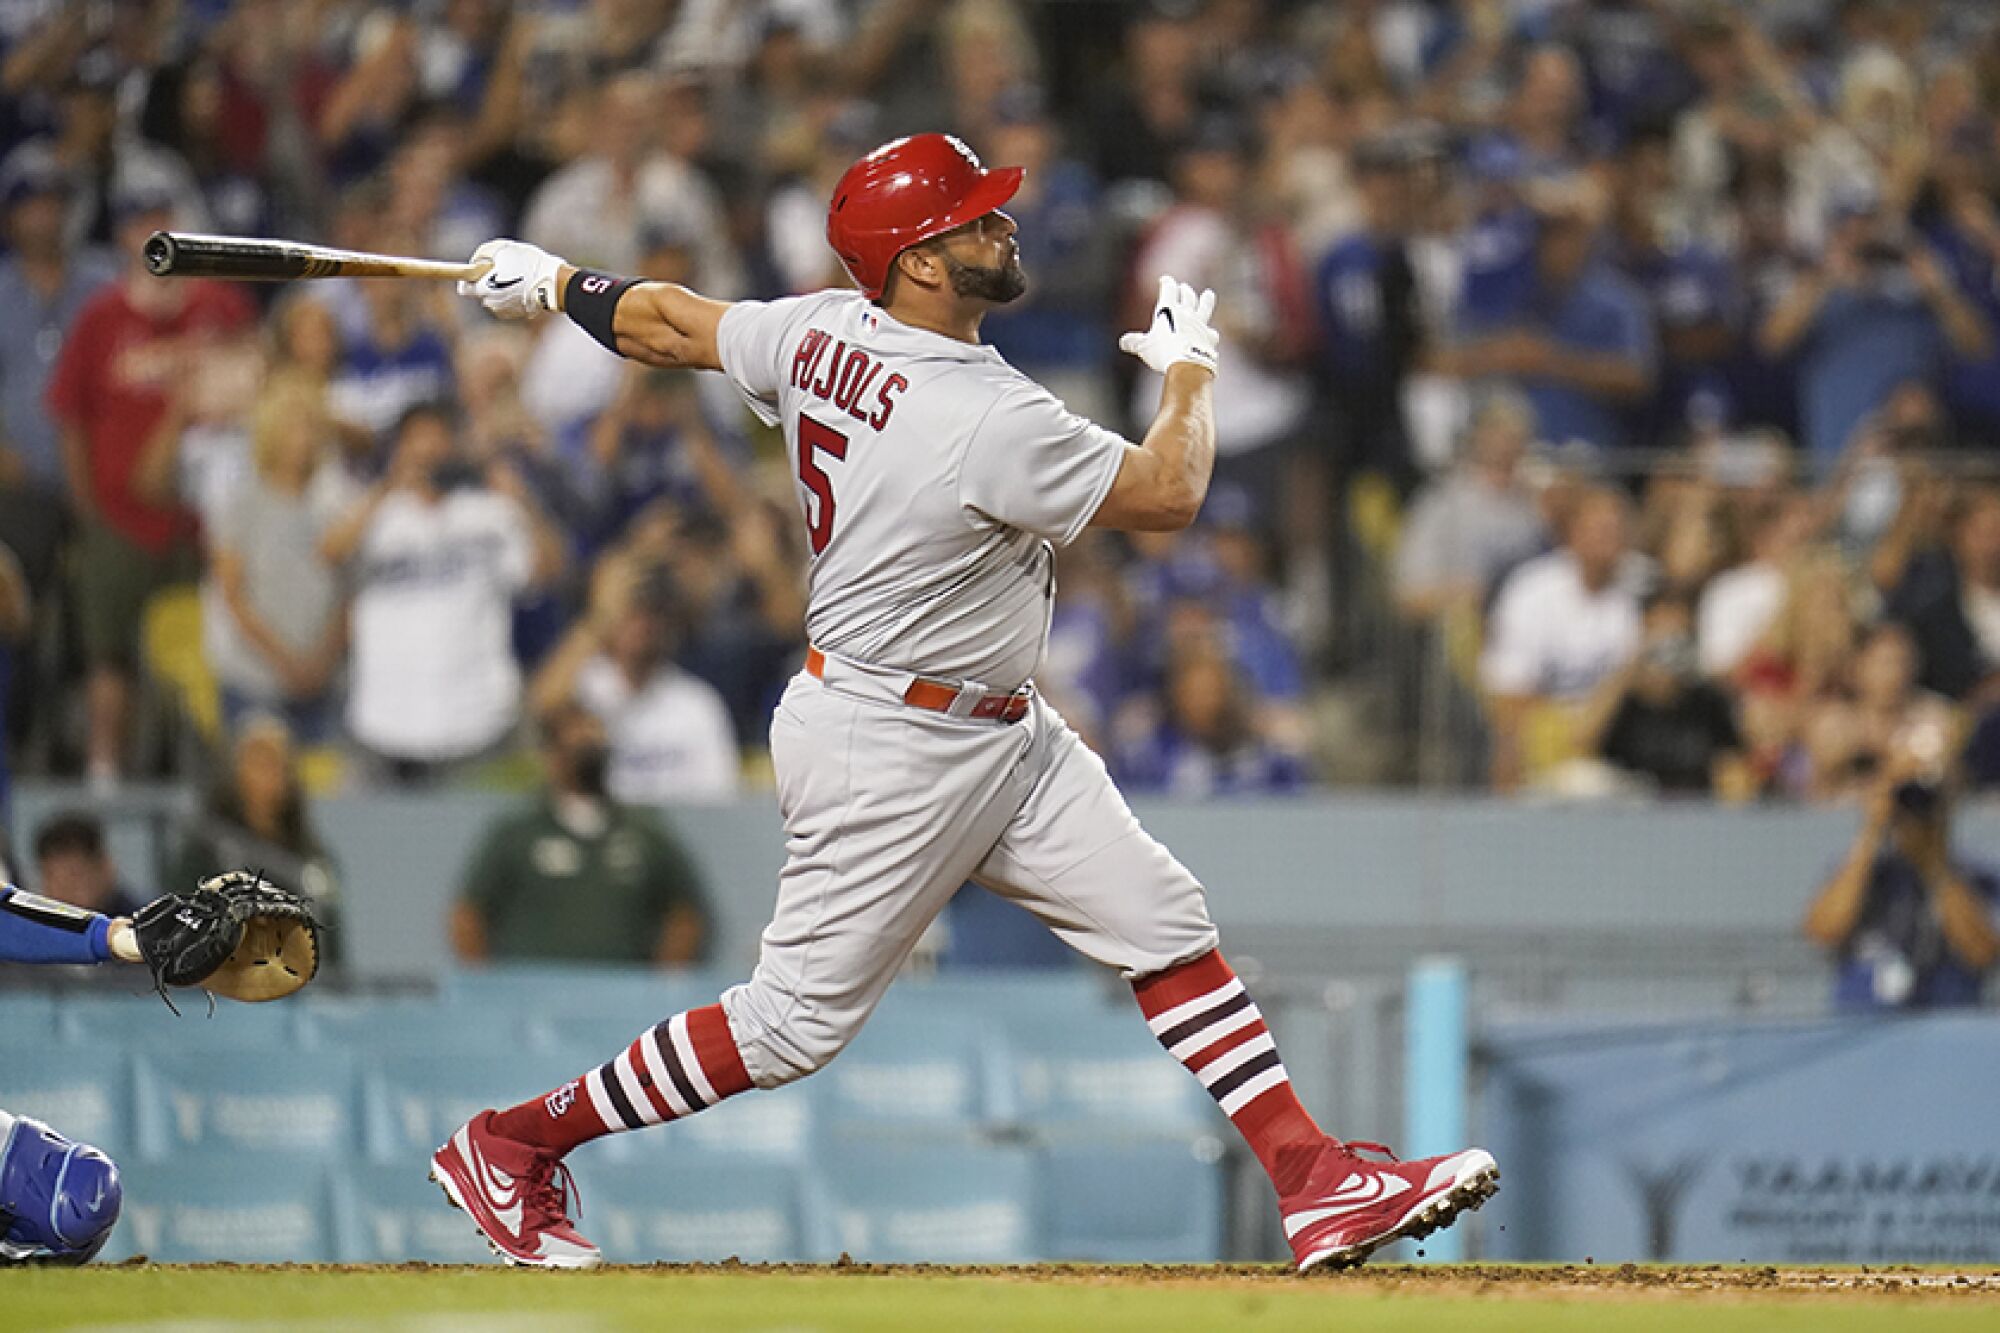 Albert Pujols hit his 700th career home run in the fourth inning Friday.